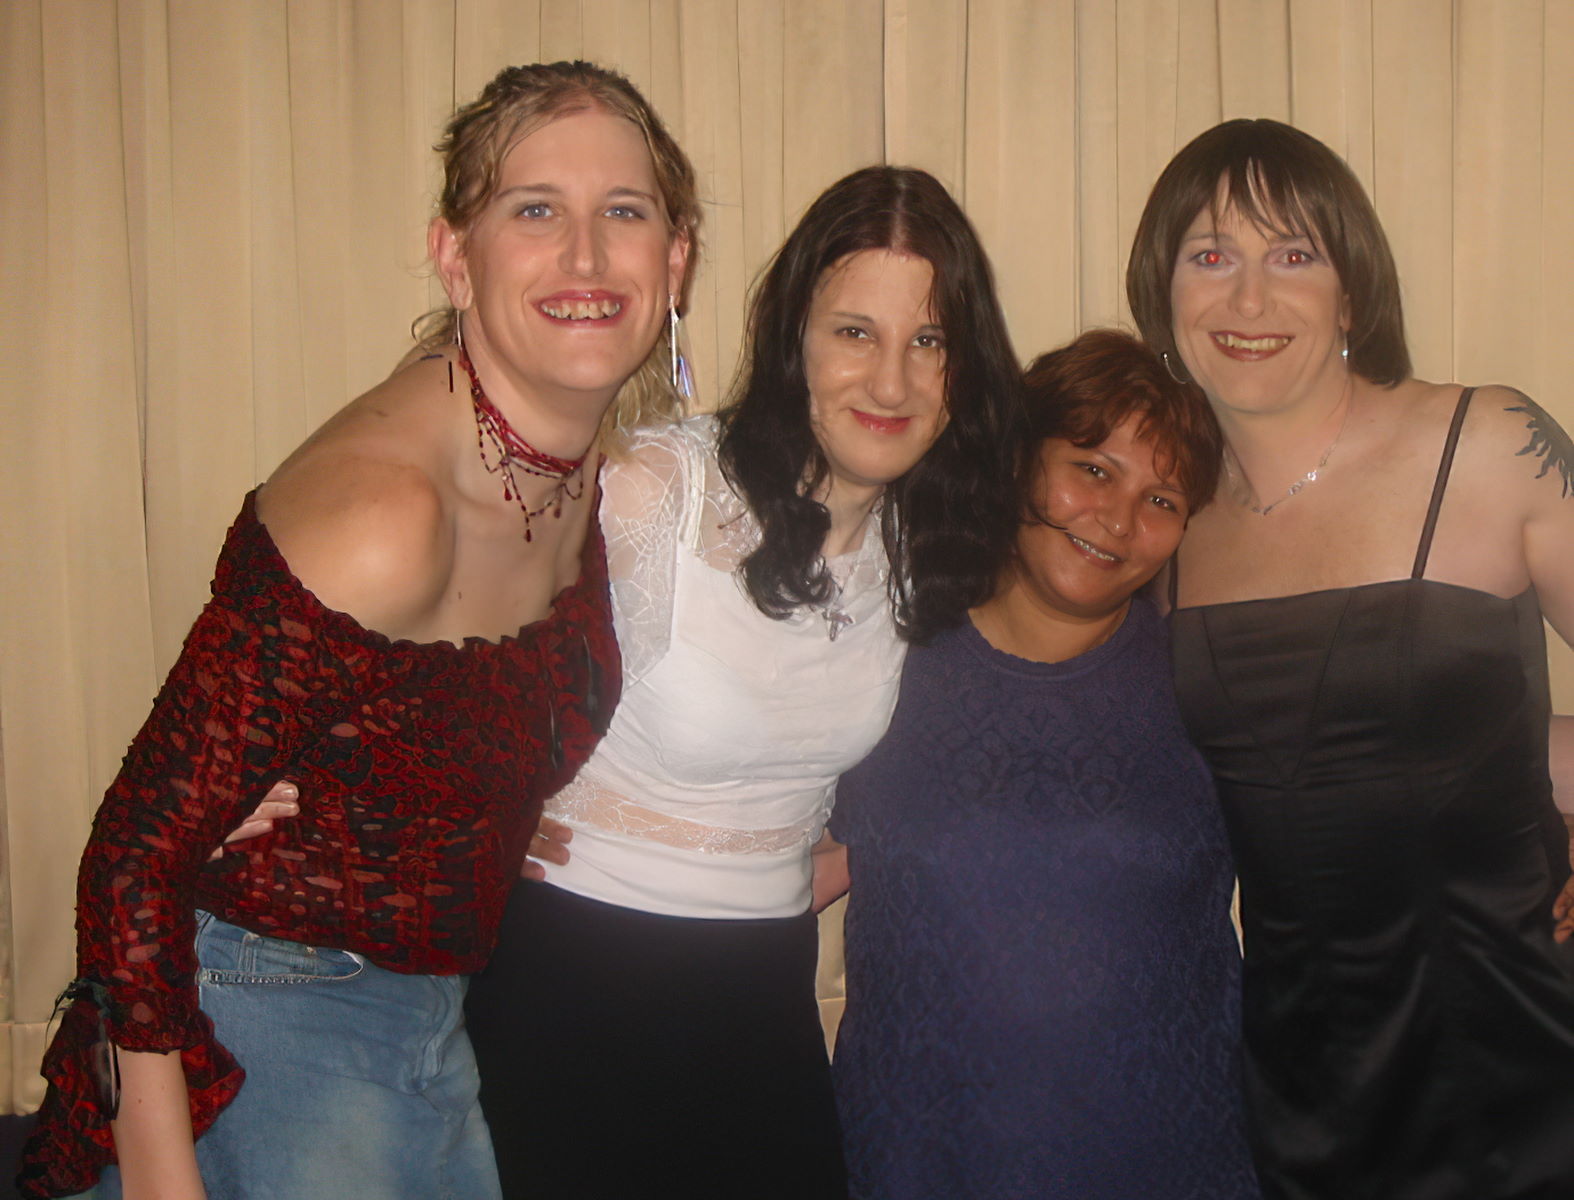 Helen, Lin, Lisa-Marie and I at the party.